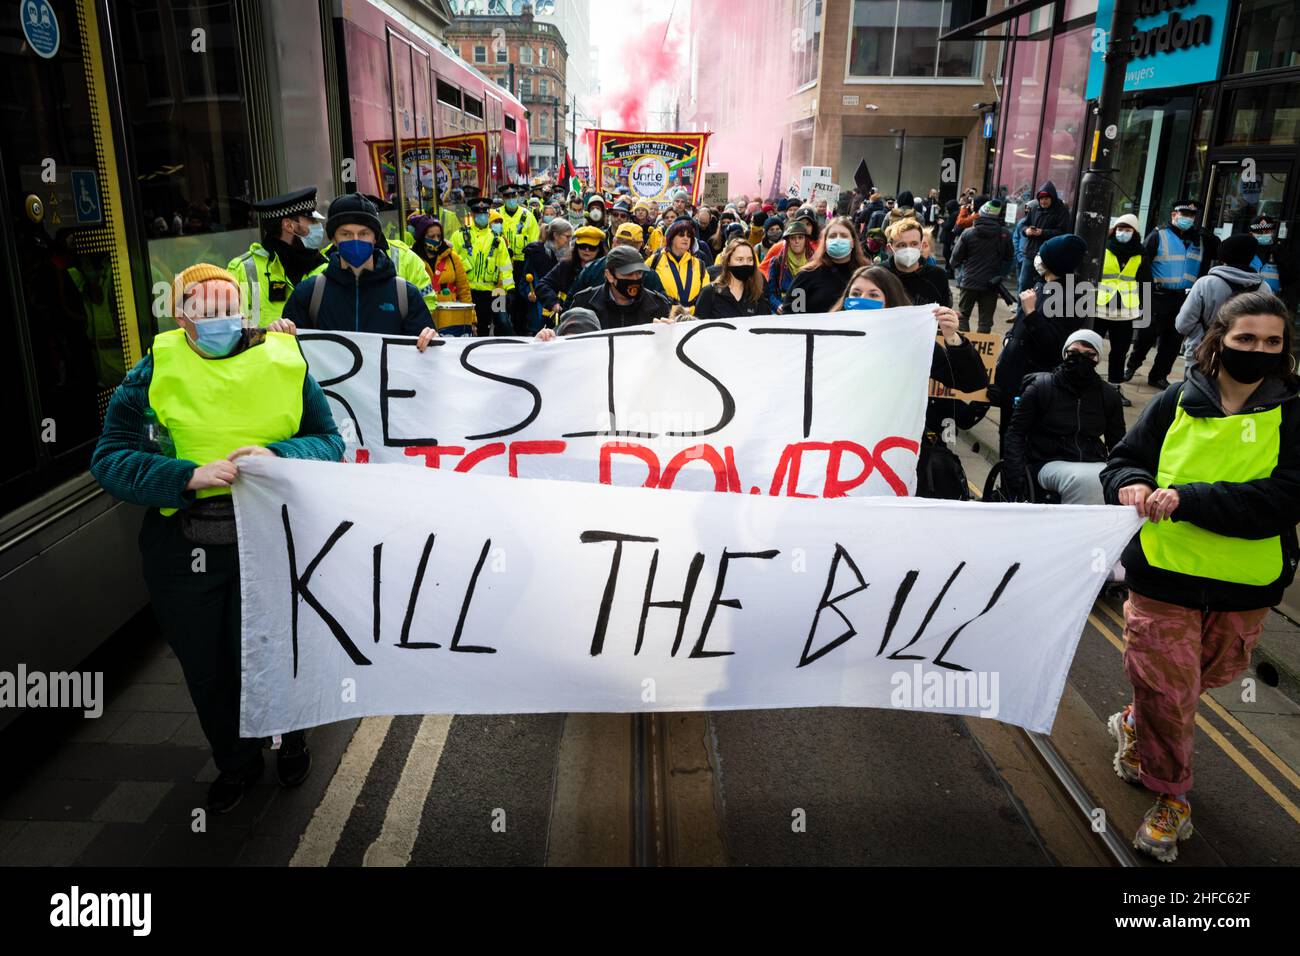 Manchester, UK. 15th Jan, 2022. Hundreds of people march during a Kill The Bill national day of action. Protests across the country have been organised due to the proposed Police, Crime, Sentencing and Courts Bill. that, if passed, would introduce new legislation around demonstrations.ÊAndy Barton/Alamy Live News Credit: Andy Barton/Alamy Live News Stock Photo